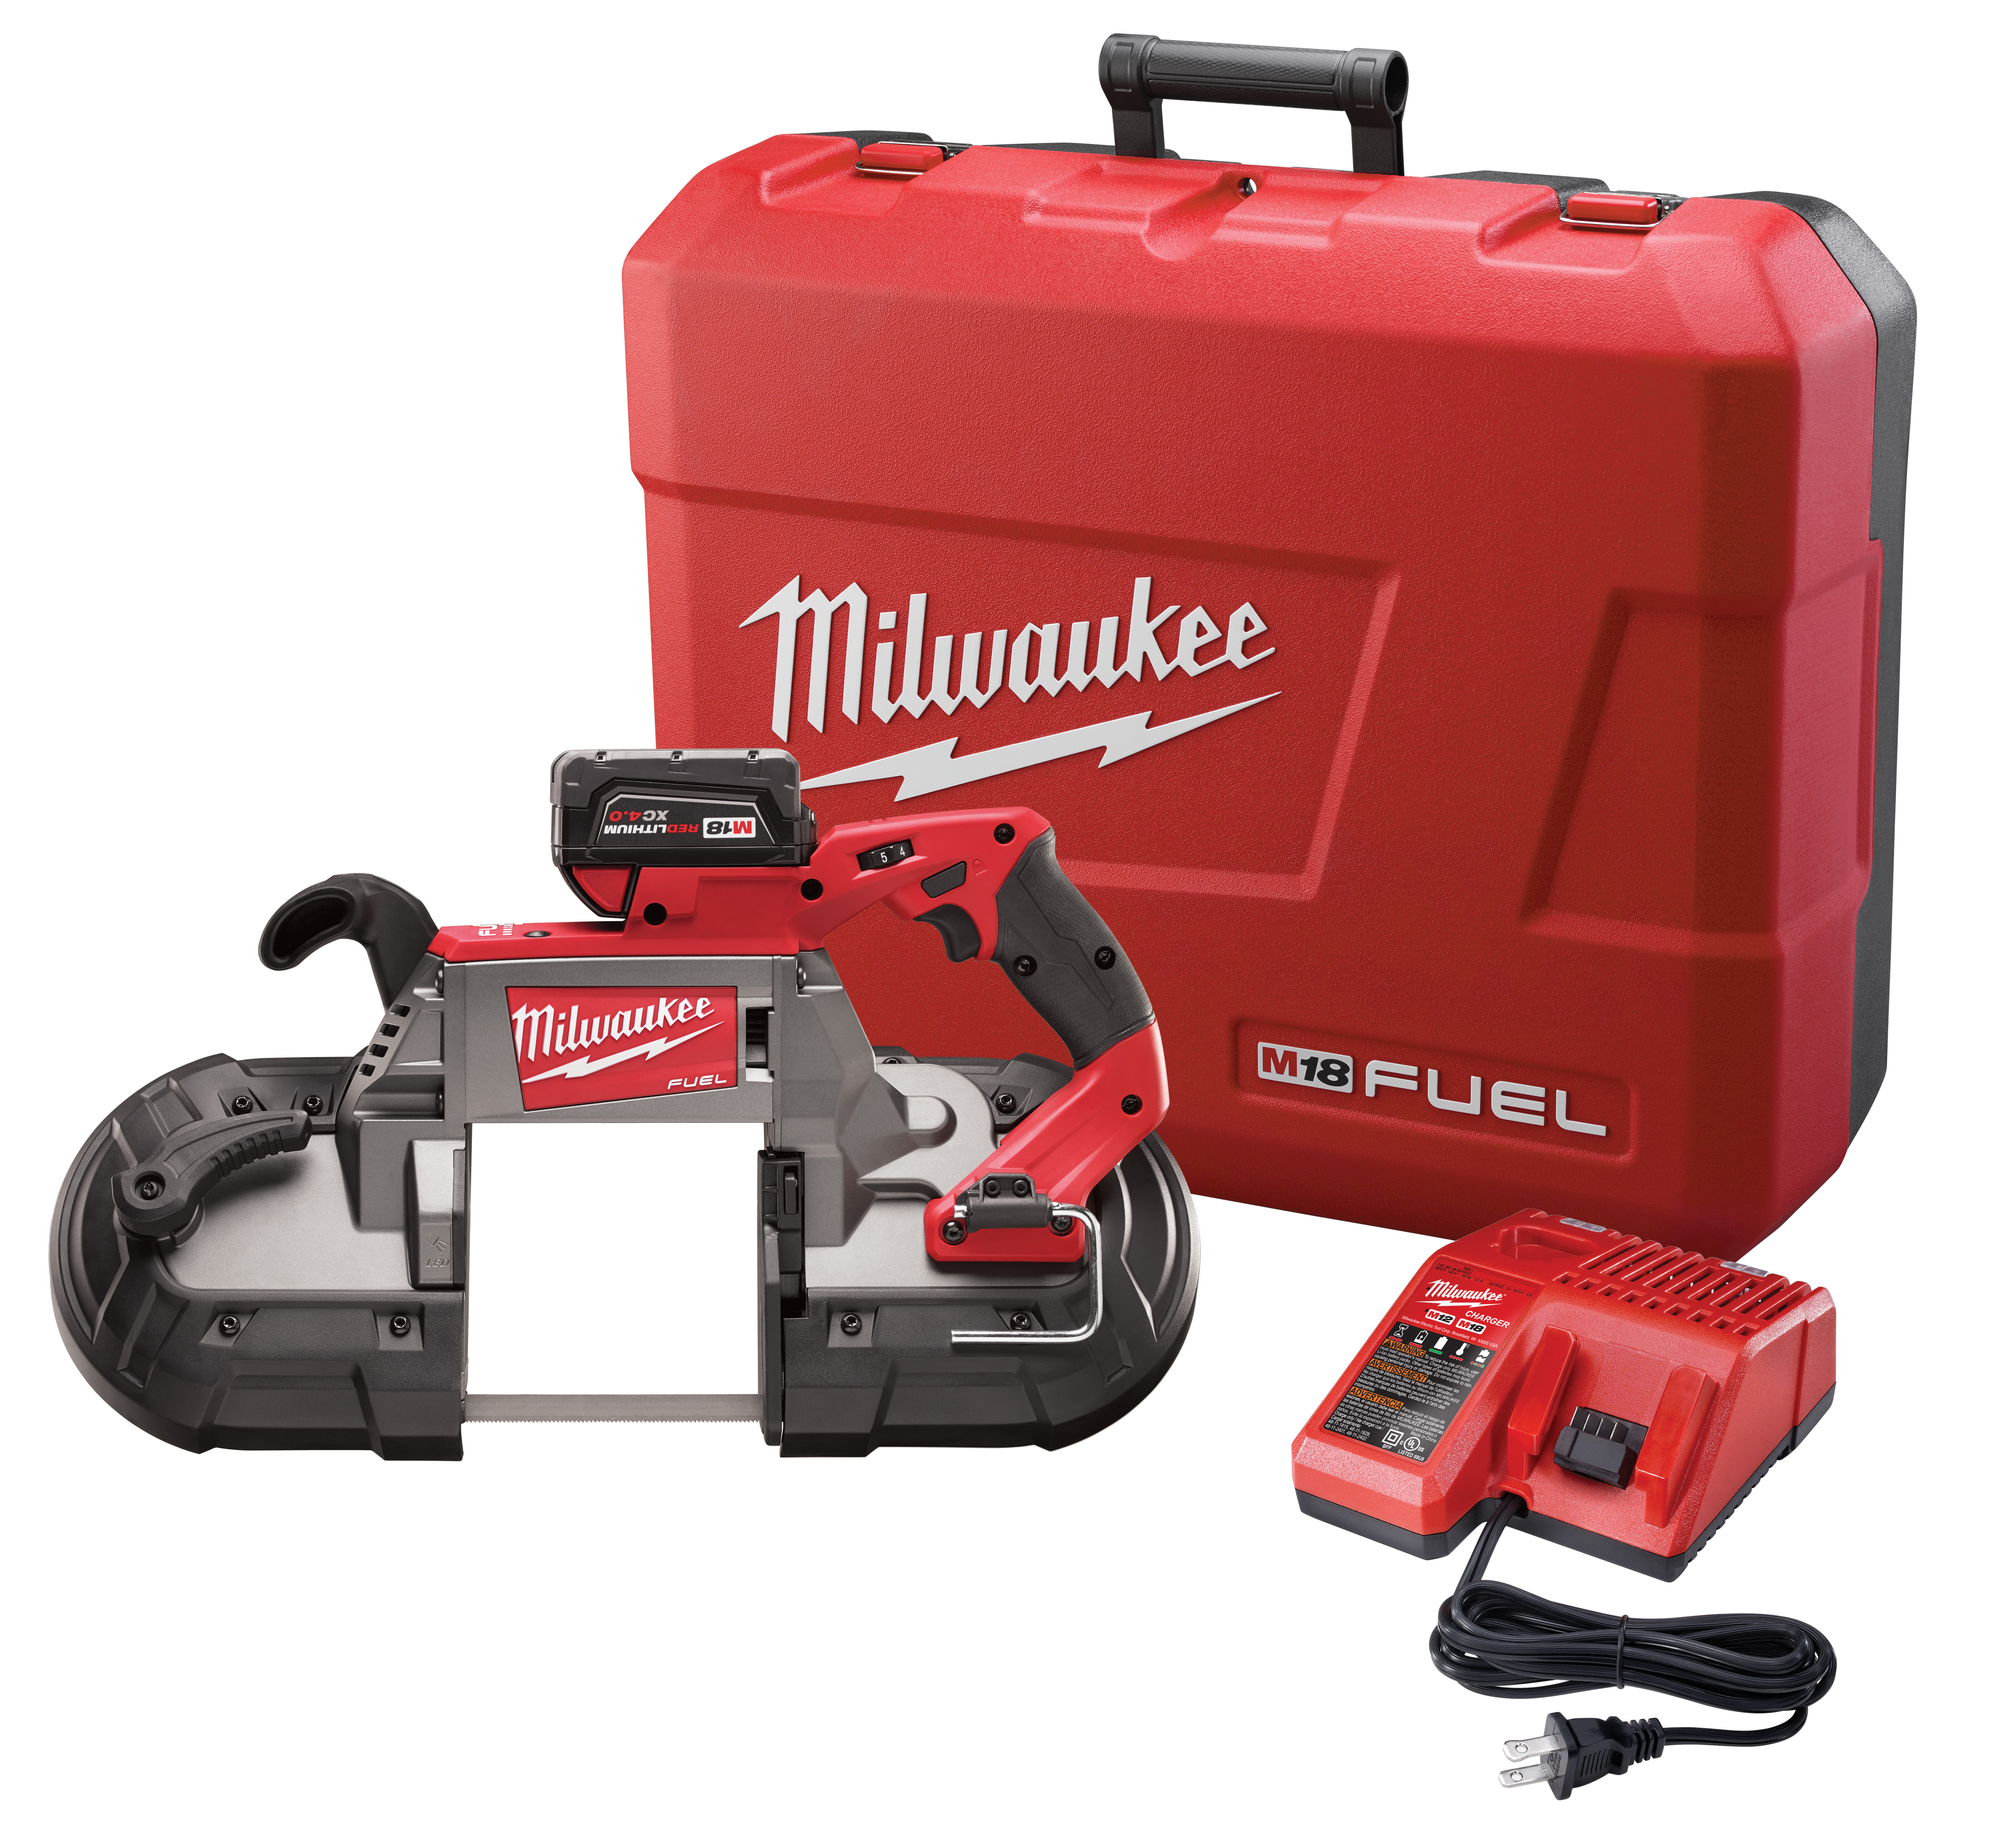 2729-21 045242321582 The M18 FUEL™ band saw cuts faster than its corded counterparts, provides the same legendary durability of a Milwaukee corded band saw, and delivers up to 2X more run time than other cordless options. Utilizing a POWERSTATE™ brushless motor and Constant Power Technology™, the M18 FUEL™ deep cut band saw cuts faster than corded band saws. It also delivers the same legendary durability that has made Milwaukee corded deep cut band saws second to none for decades by utilizing over 90% of the same parts. Equipped with Jobsite Armor Technology™, the tool is better protected from drops and debris with a proprietary composite material and crush zone barriers to absorb impacts. REDLITHIUM™ XC5.0 Battery technology provides up to 2.5X more run-time through superior pack construction, electronics, and more work per charge over the life of the battery than any competitive lithium-ion battery on the market. REDLINK Plus™ intelligence has the most advanced system of cordless power tool electronics, providing optimized performance, electronic clutch, and overload protection using total system communication between tool, battery and charger. The M18 FUEL™ deep cut band saw features a tool-free locking adjustable shoe that can adjust from an extended shoe to no shoe in seconds. Other innovative features include a hang hook for easy storage in-between cuts, LED light to illuminate the cutting area, superior cut visibility, and a balanced body design that allows the tool to rest naturally and comfortably in the user’s hands.